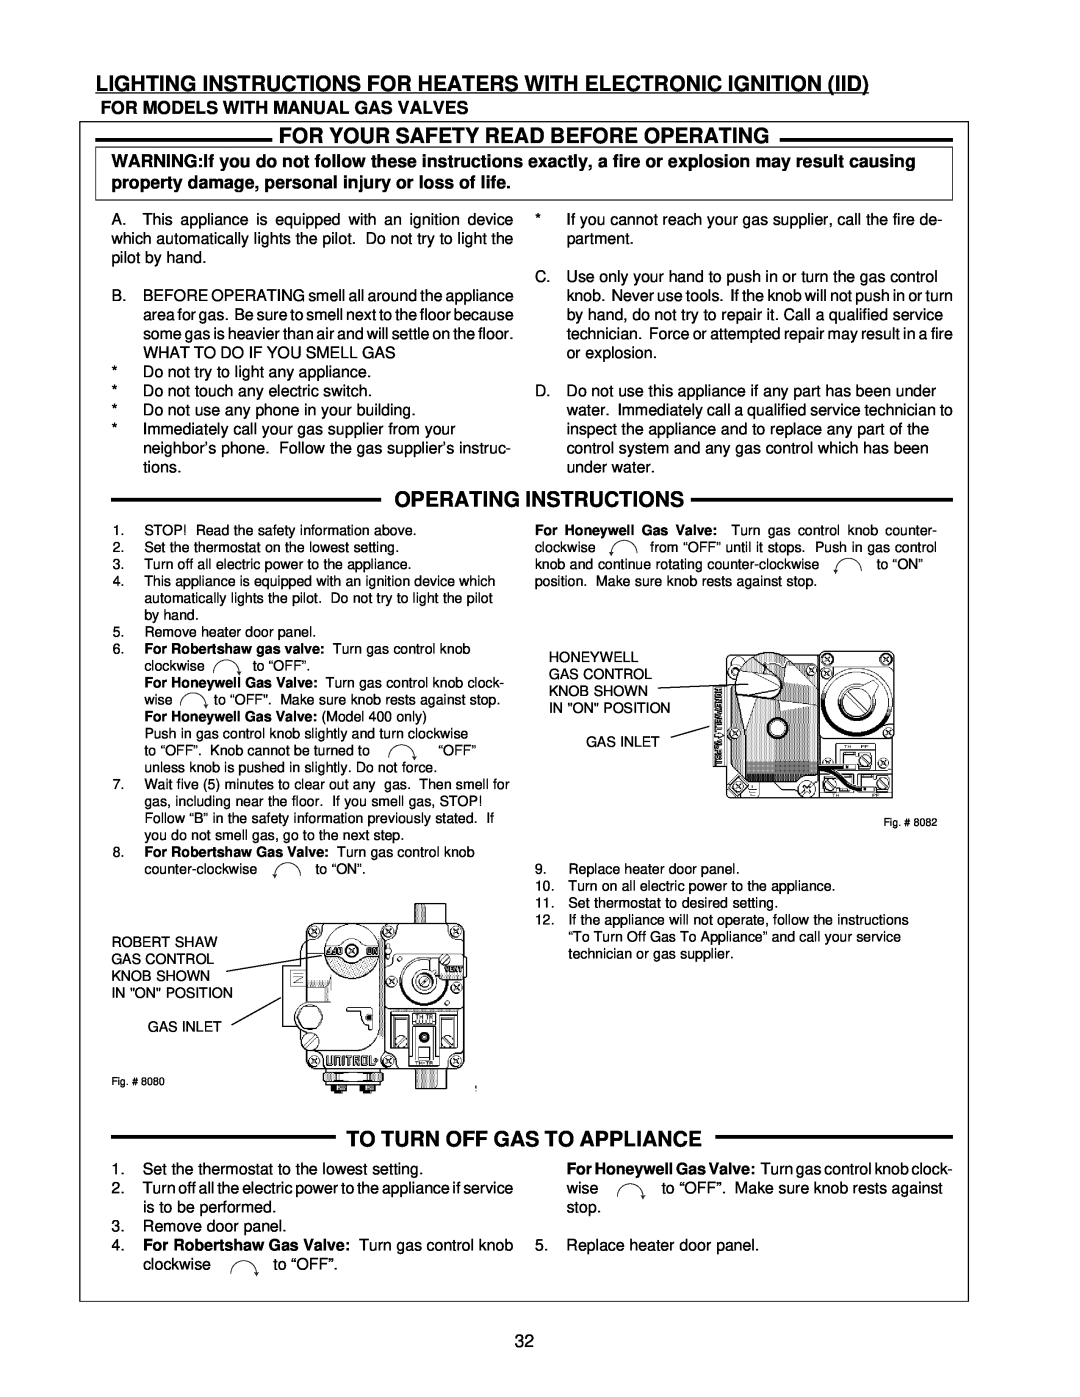 Raypak NH, 0133-4001 WH manual For Your Safety Read Before Operating, Operating Instructions, To Turn Off Gas To Appliance 